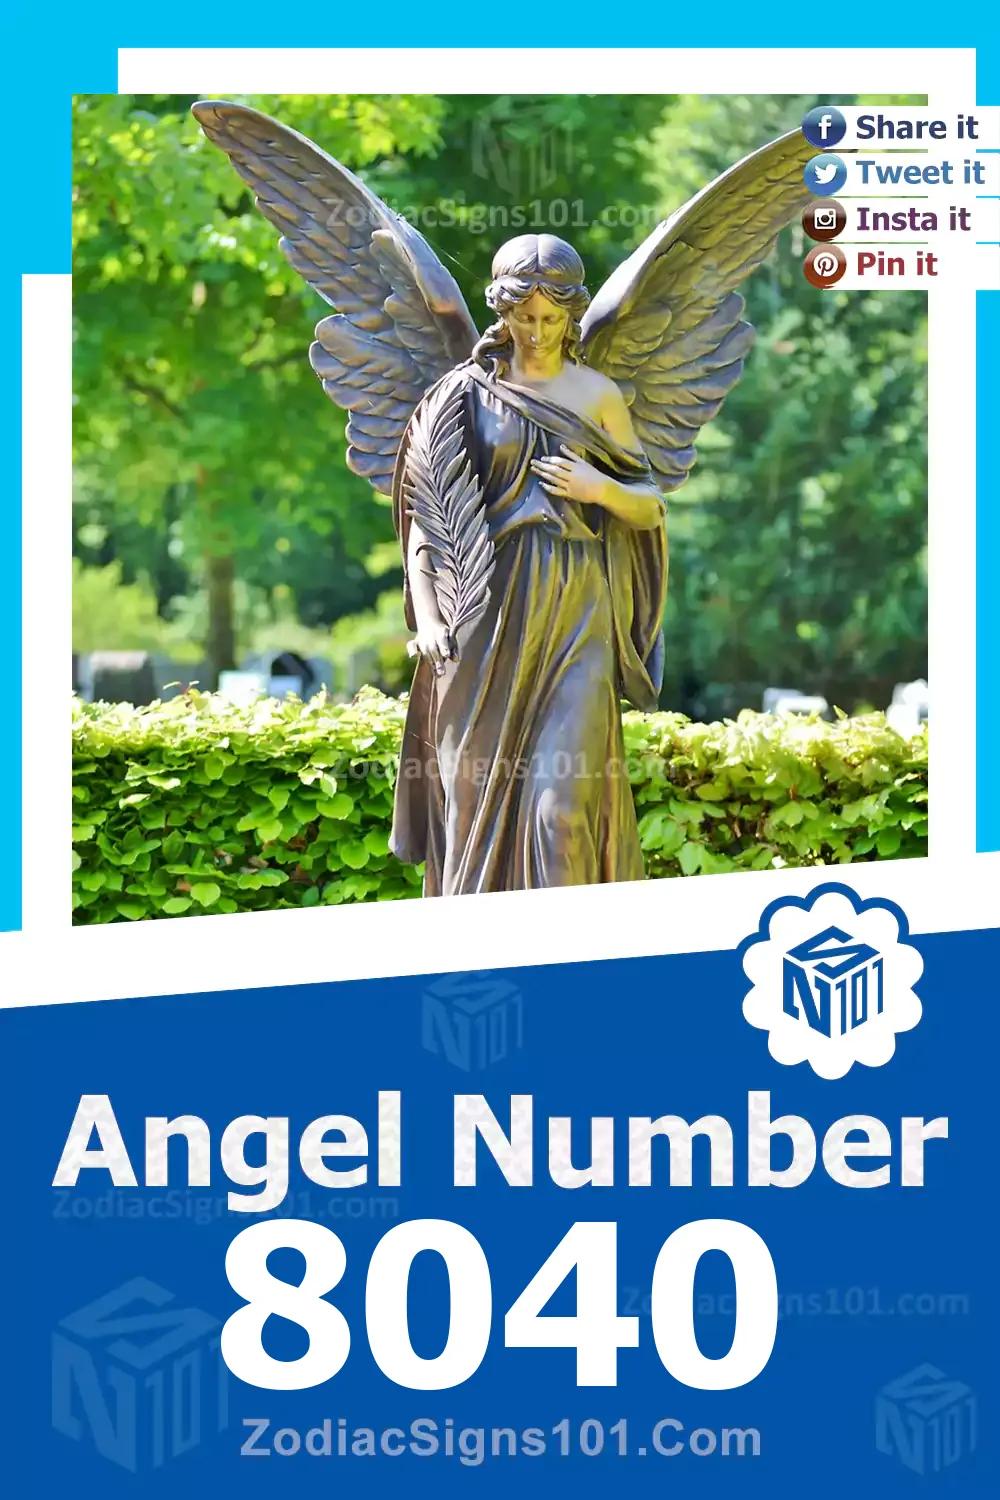 8040 Angel Number Meaning